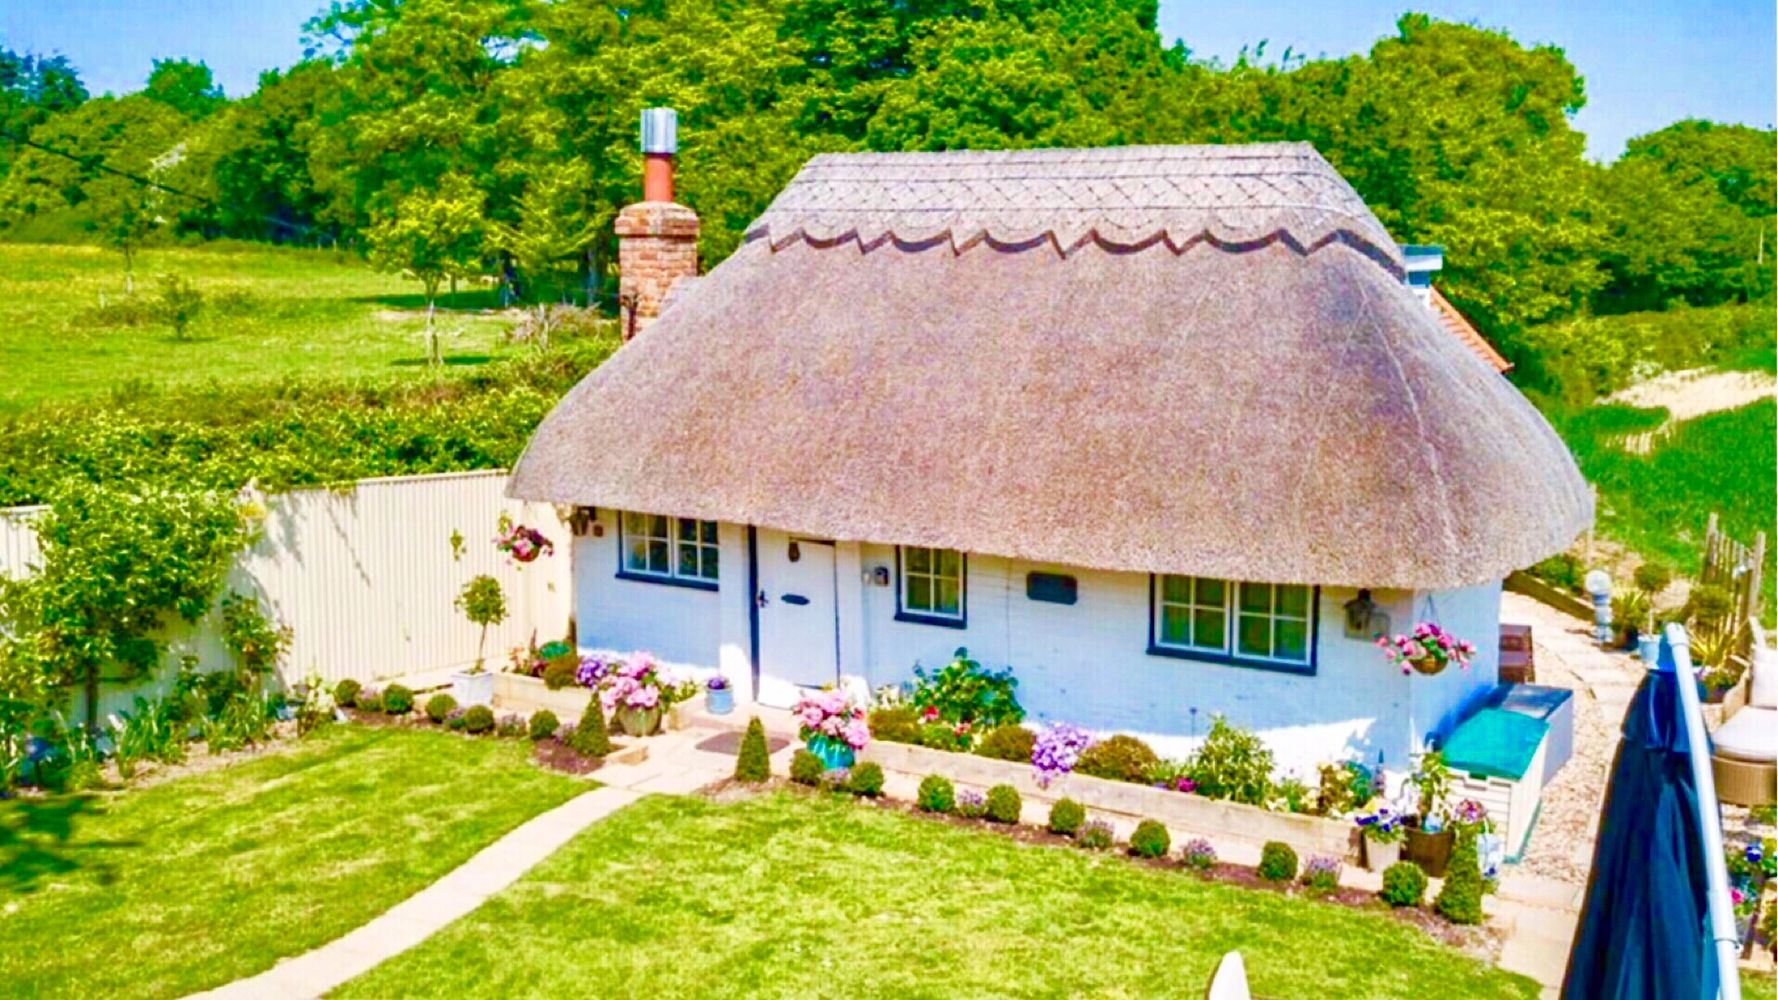 The Beautiful Brittons Hill Cottage set in glorious Kent countryside.